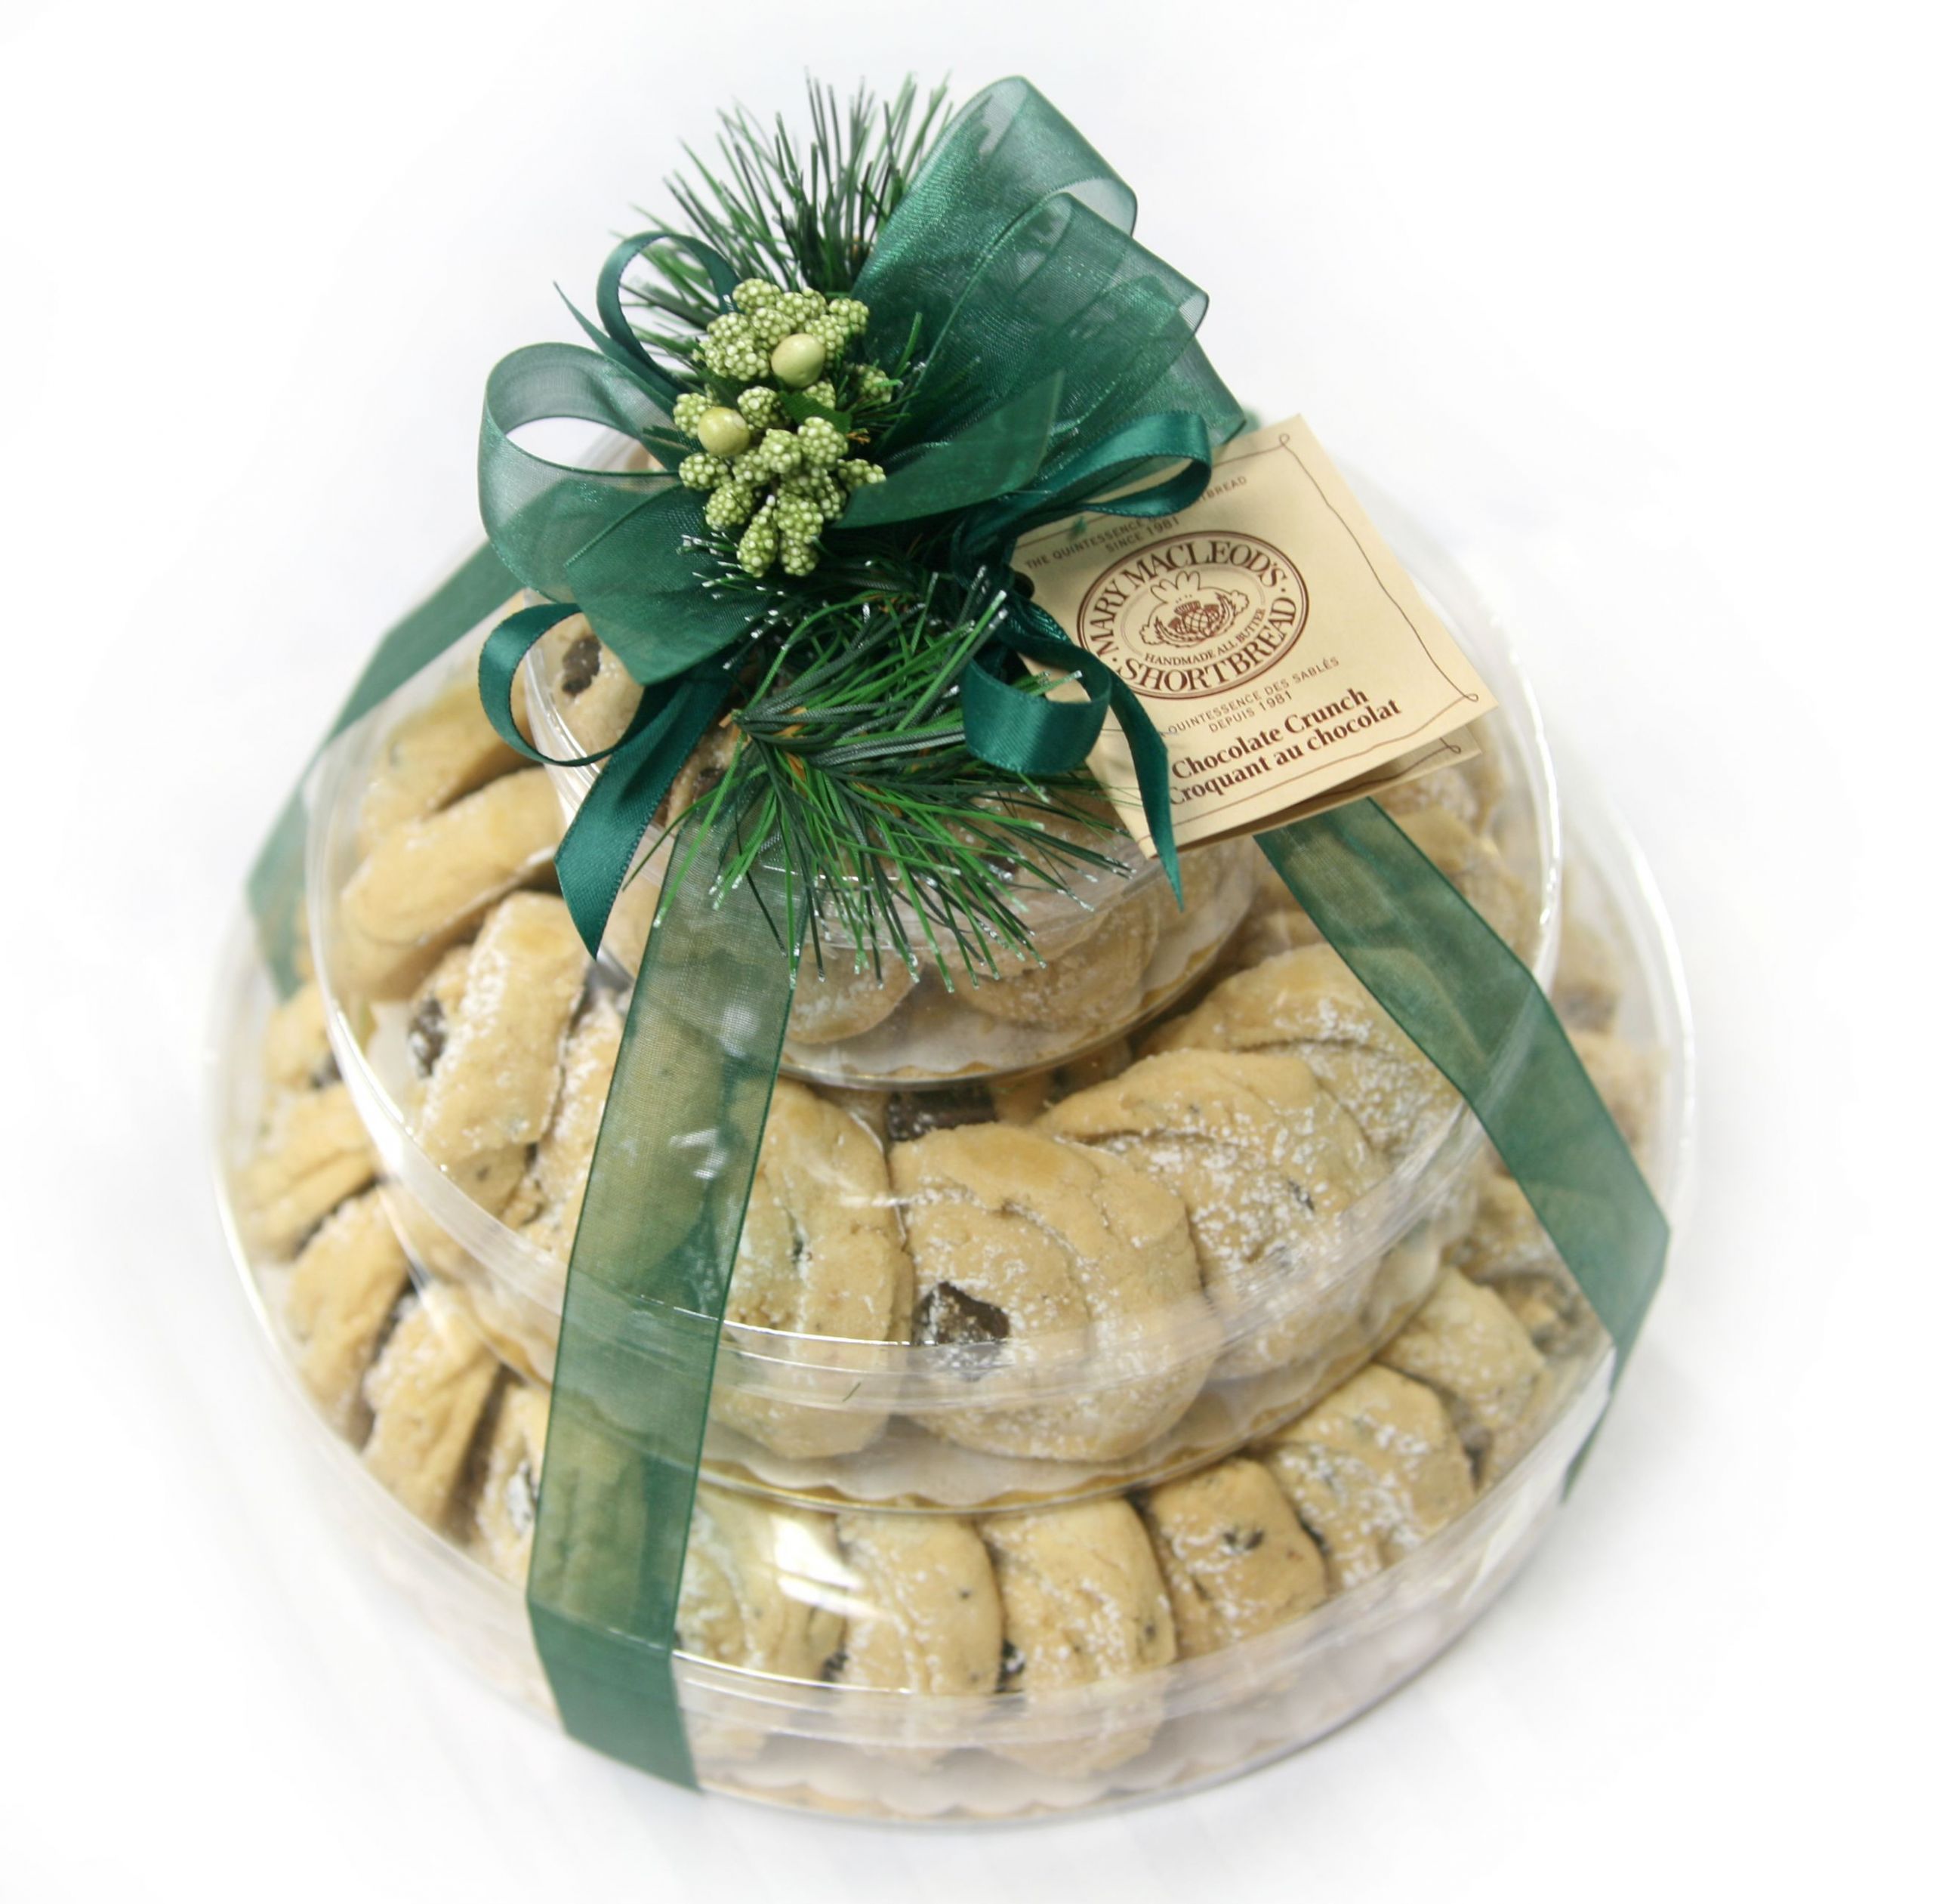 Gourmet Shortbread Cookies
 Gourmet shortbread for all Cookies to share with